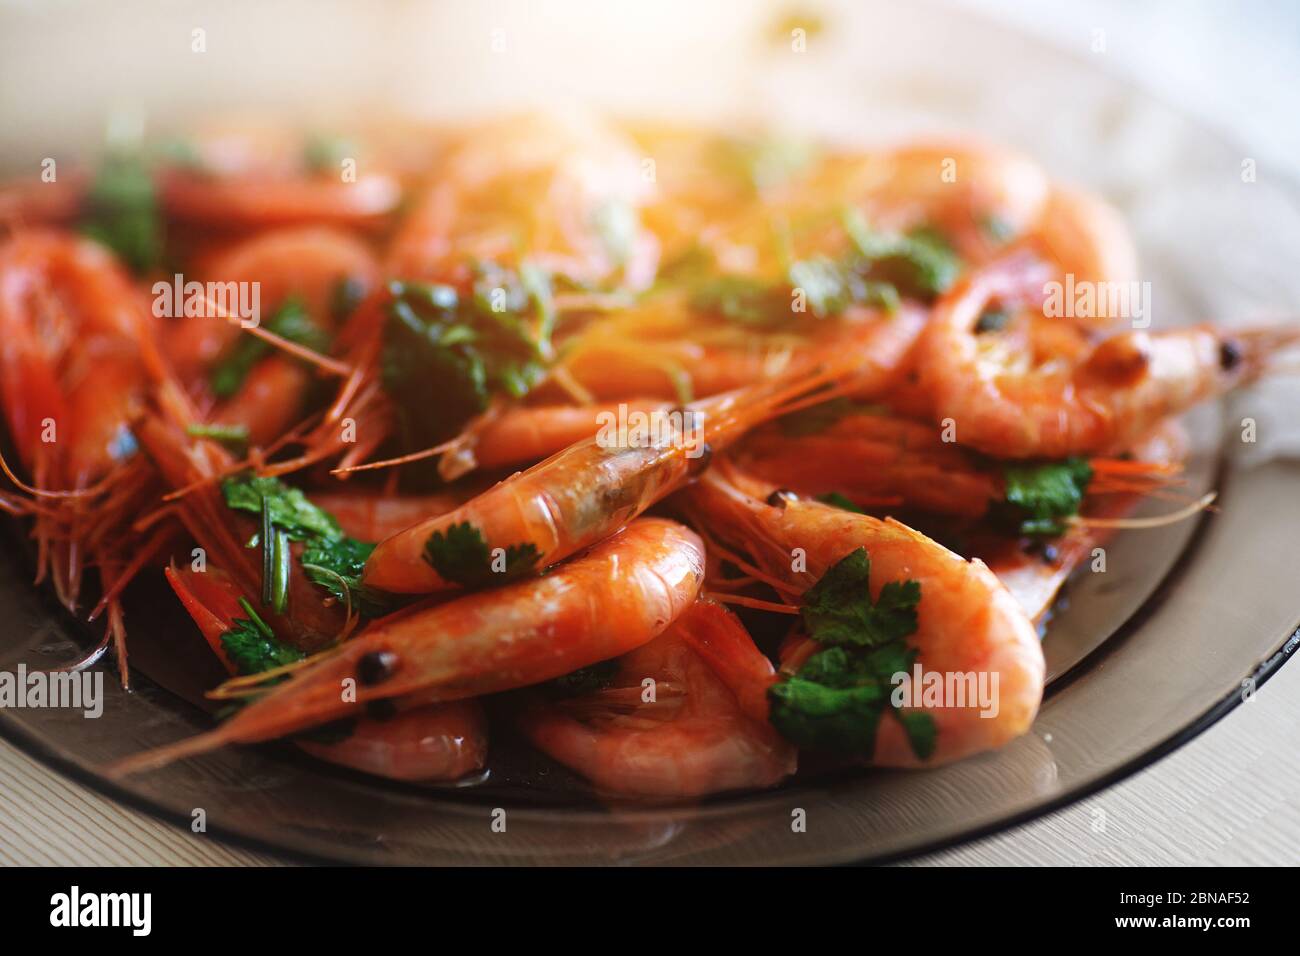 Delicious prawns with coriander in a plate on the table. Fresh seafood dish close-up Stock Photo